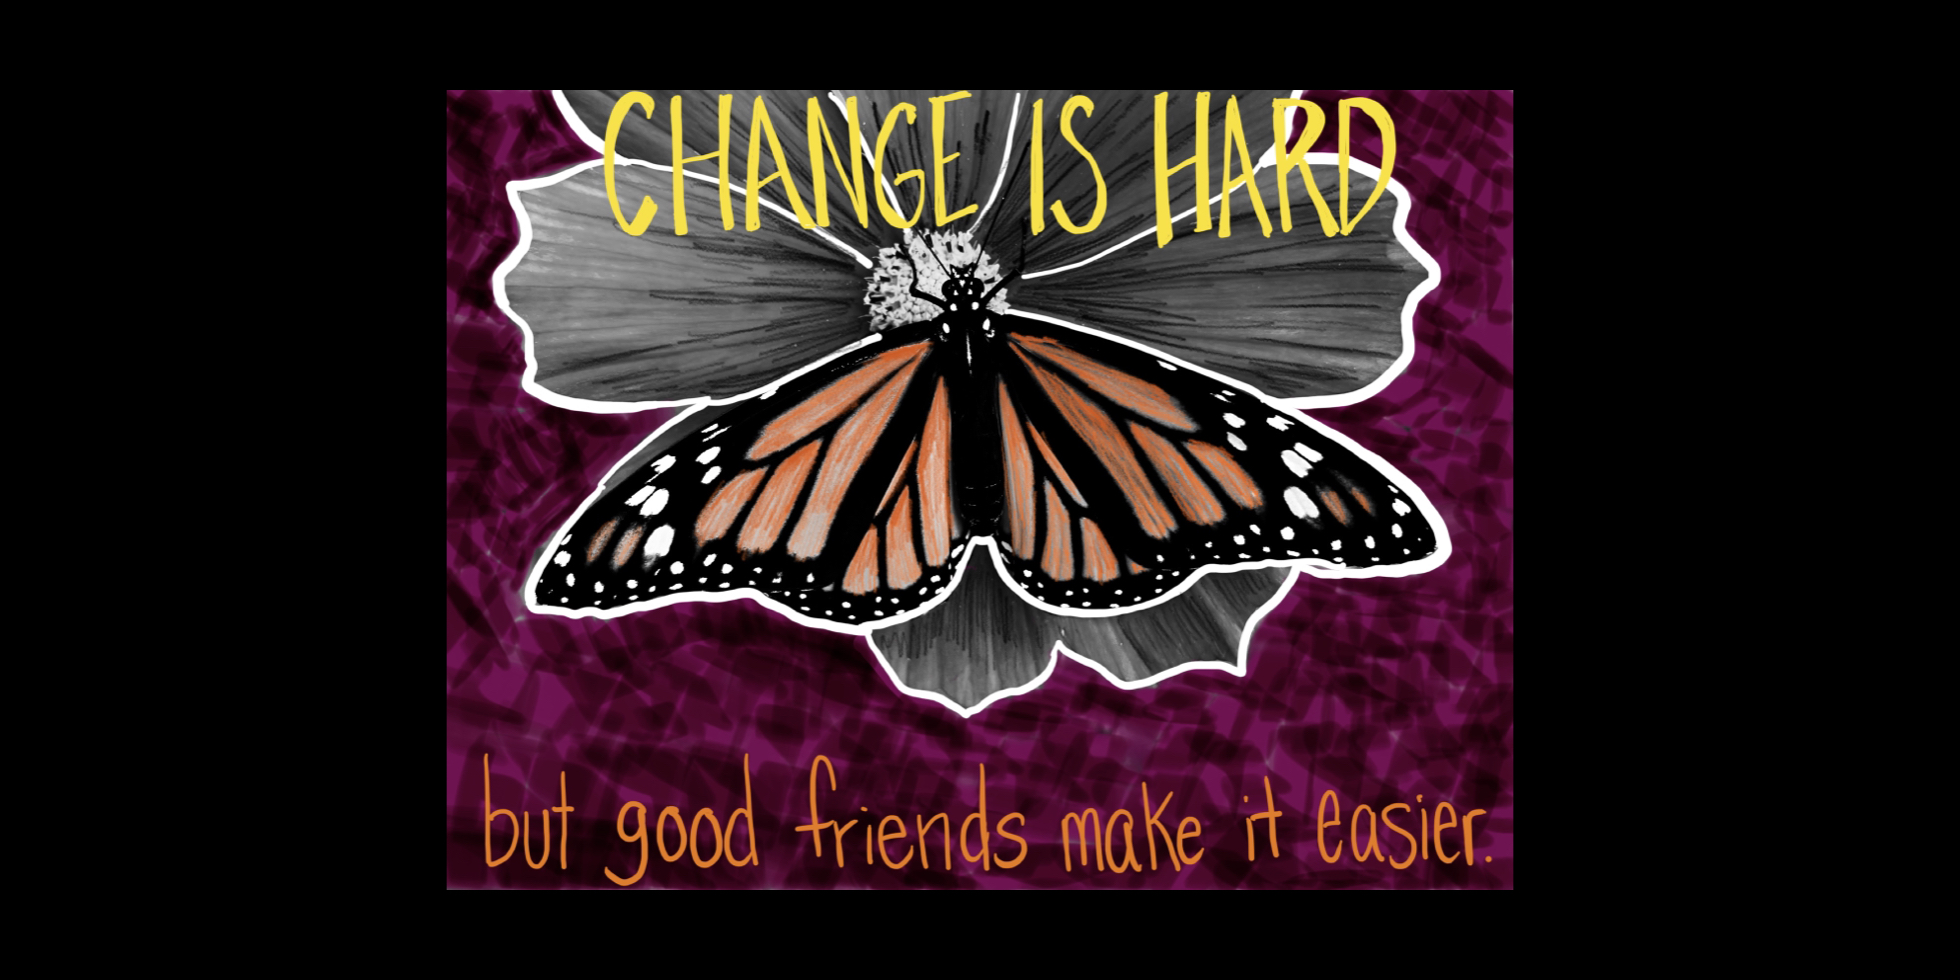 Edited photo of a monarch butterfly with the quote, "Change is hard, but good friends make it easier" written around it